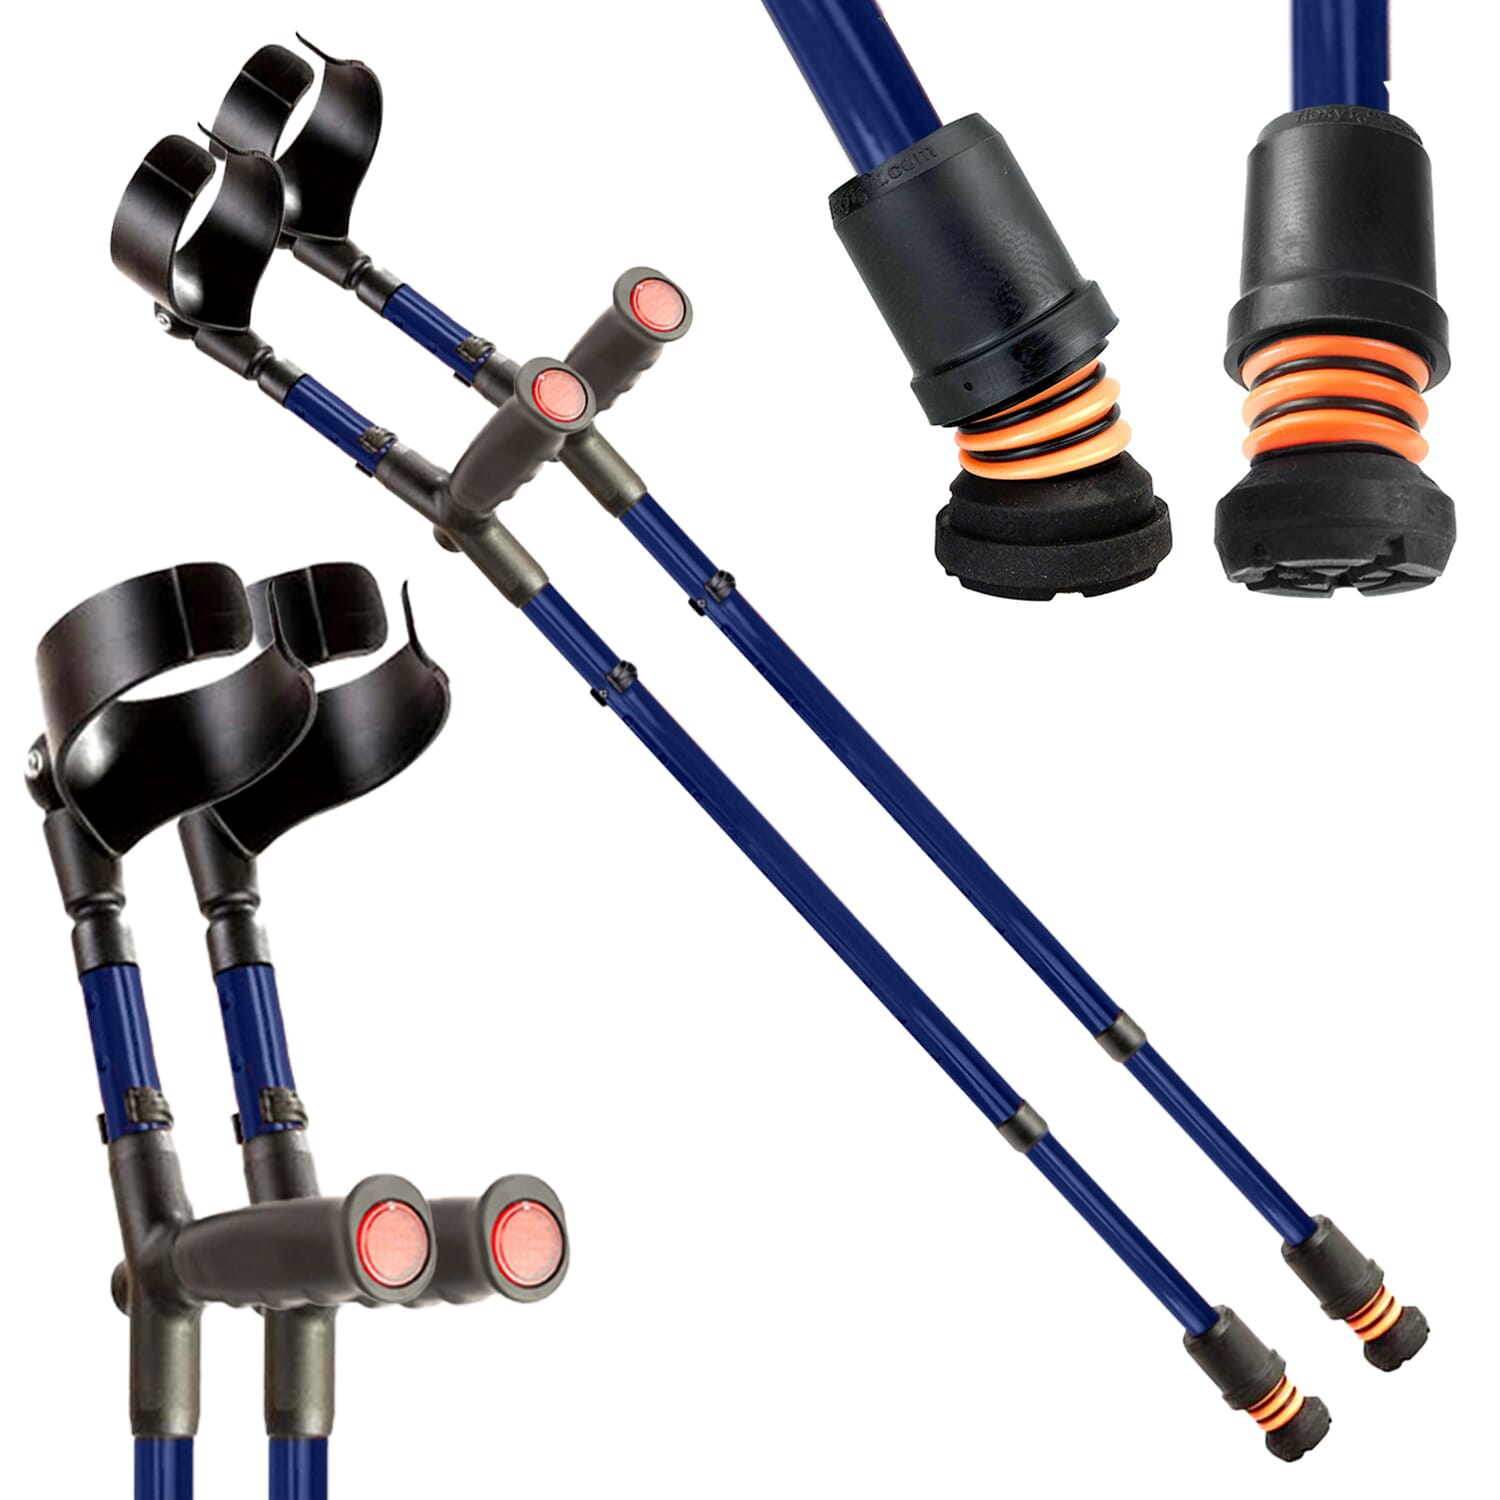 View Flexyfoot Soft Grip Double Adjustable Crutches Blue Pair information